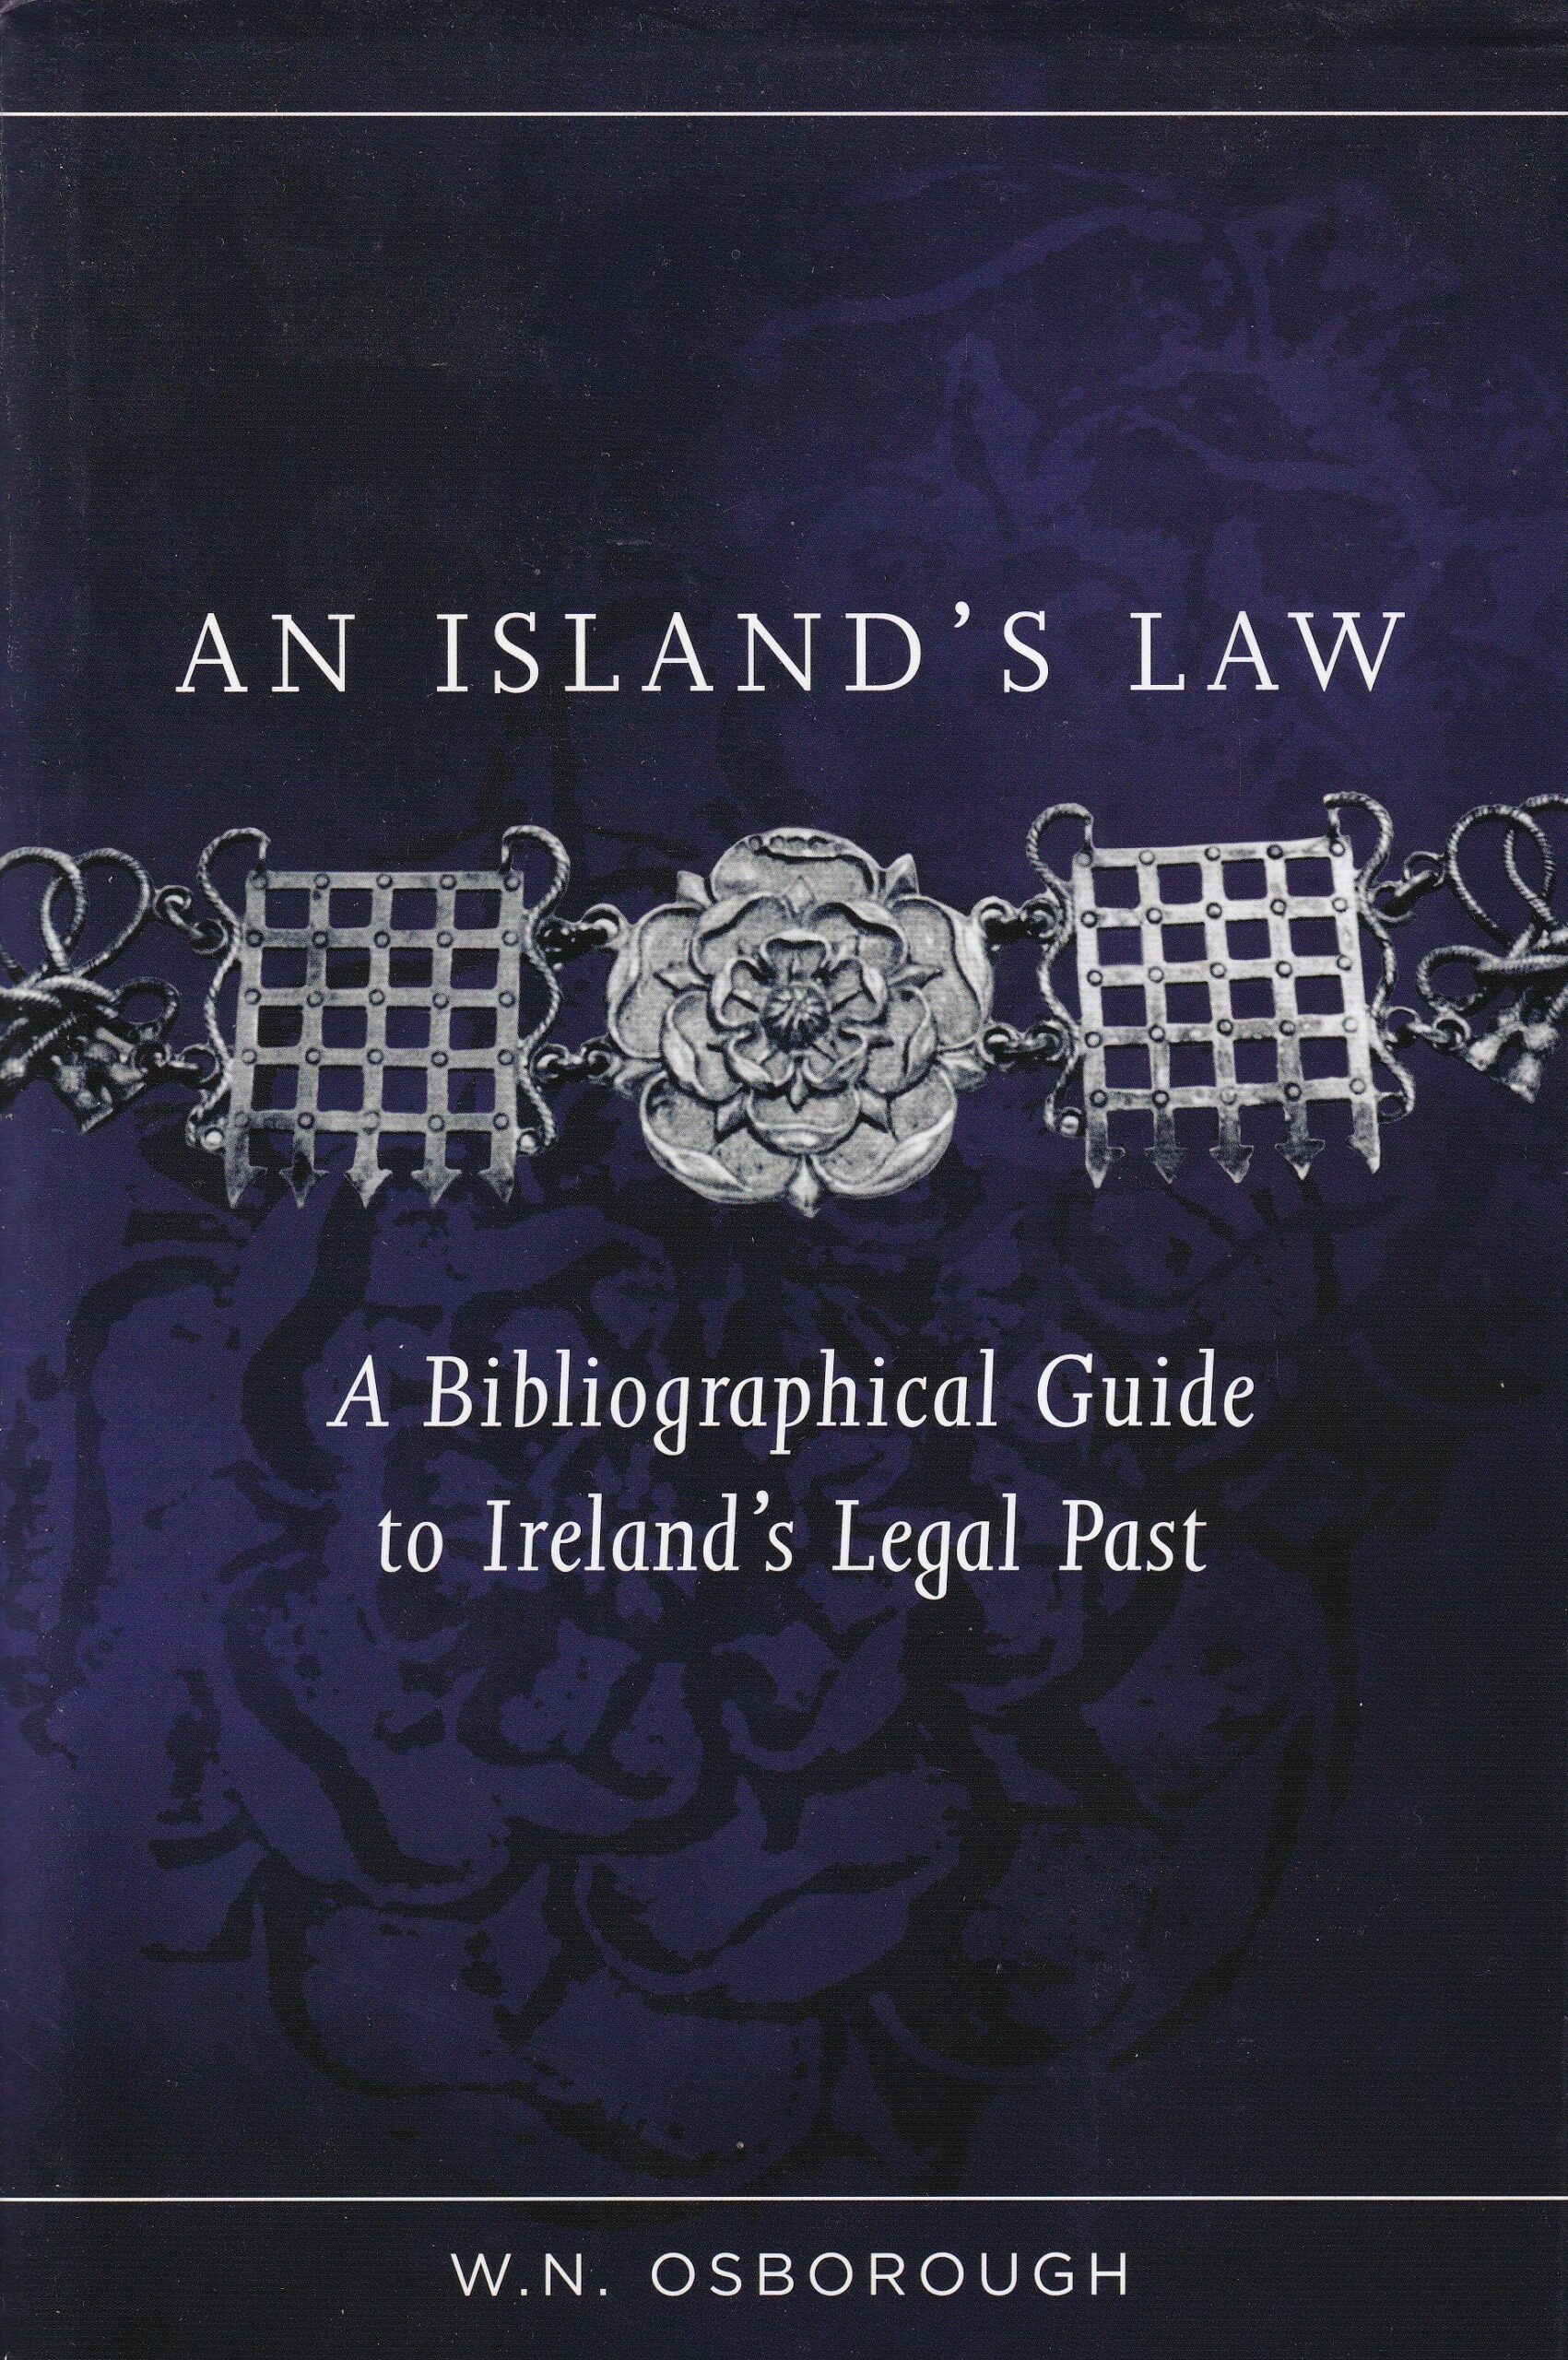 An Island’s Law: A Bibliographical Guide to Ireland’s Legal Past by W.N. Osborough